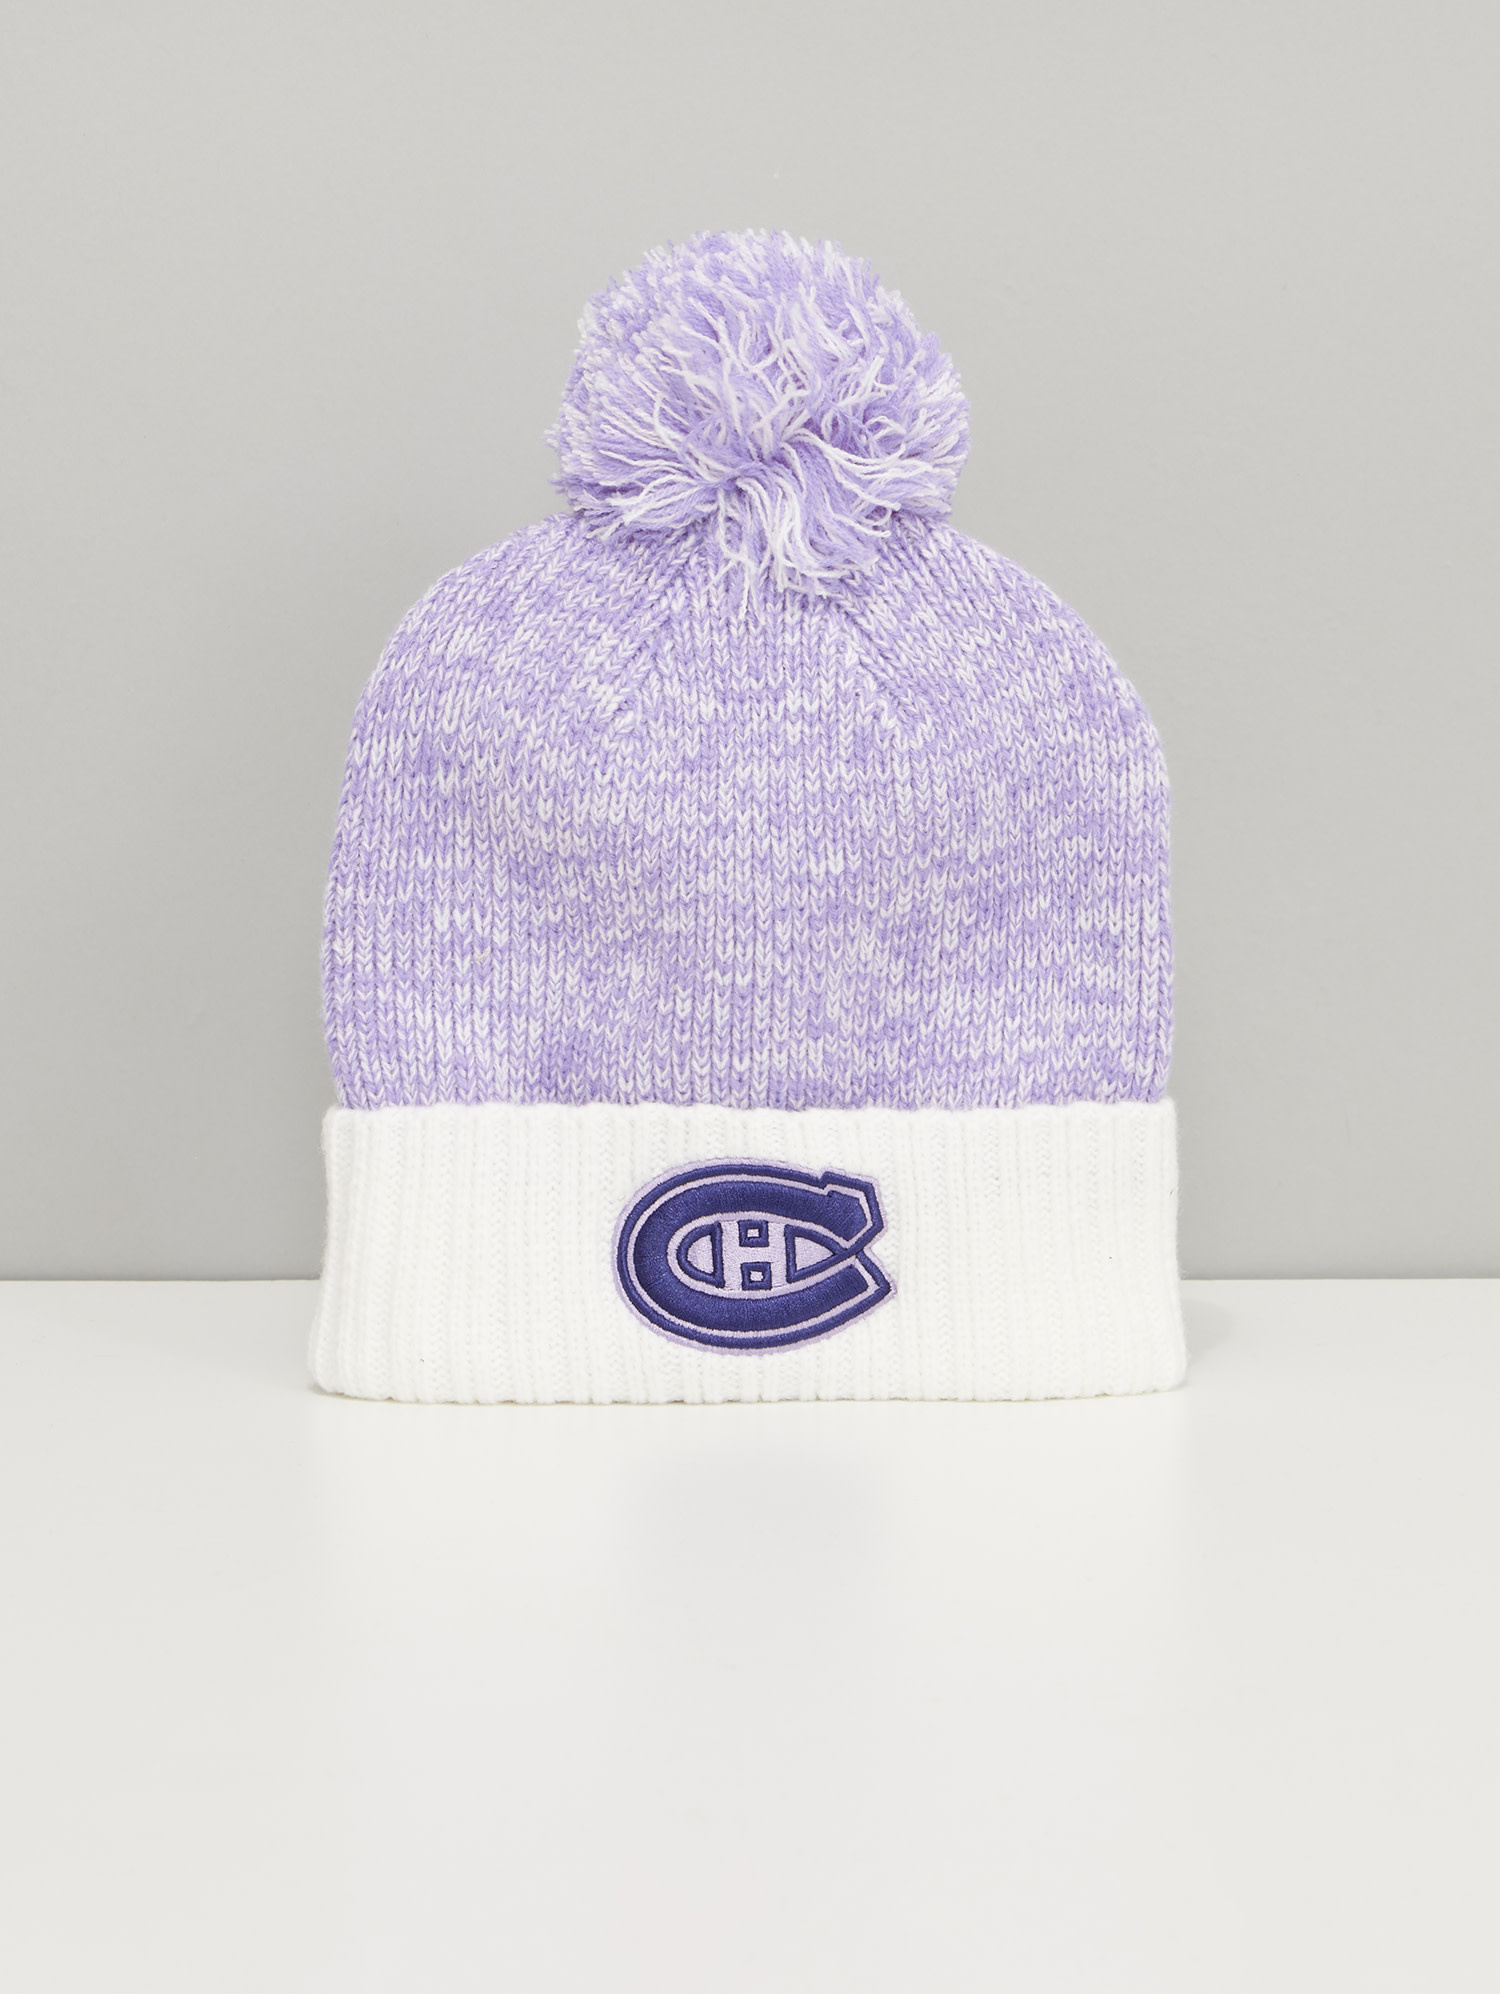 NHL Fanatics Branded Hockey Fights Cancer Authentic Pro Cuffed Knit Hat  with Pom - White/Purple